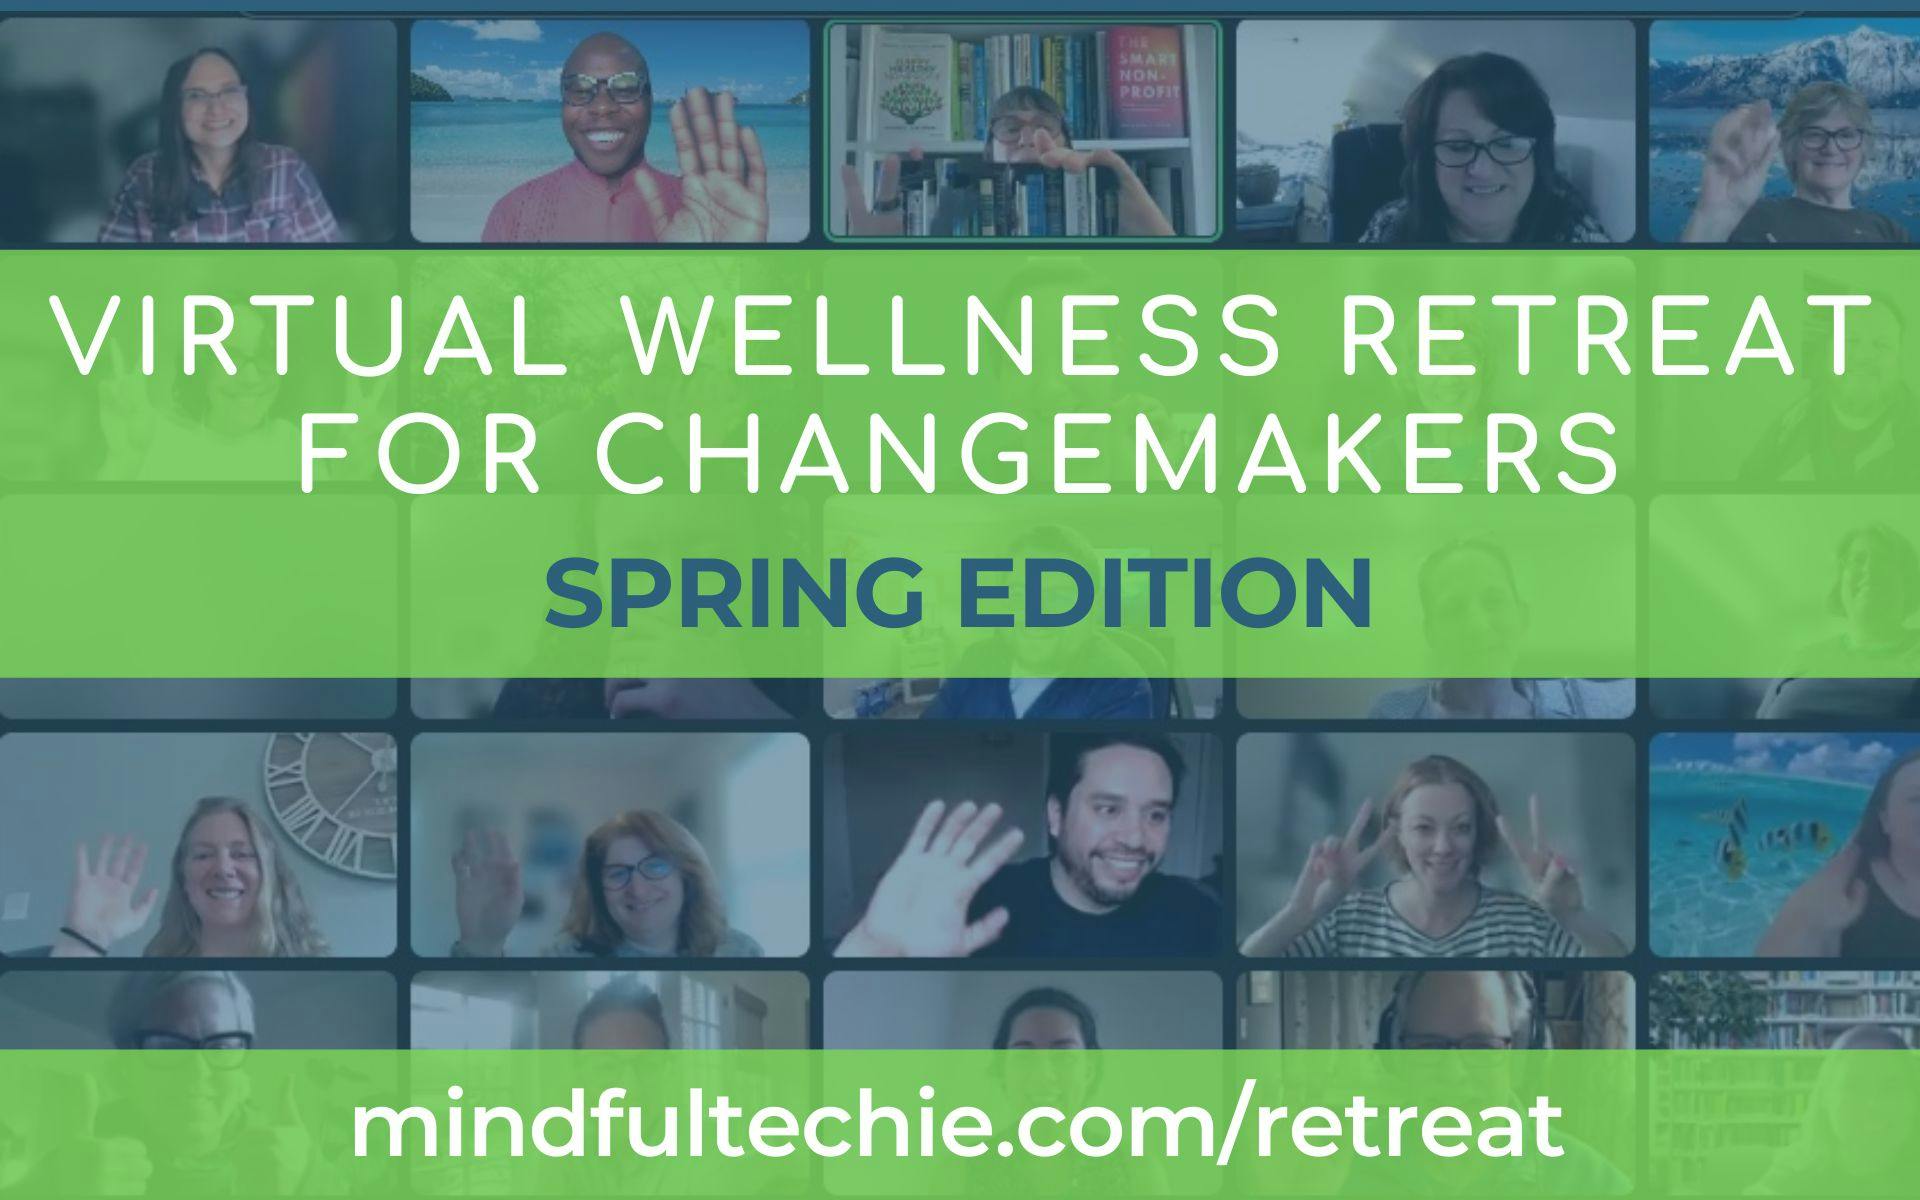 Promo image of Virtual Wellness Retreat for Changemakers